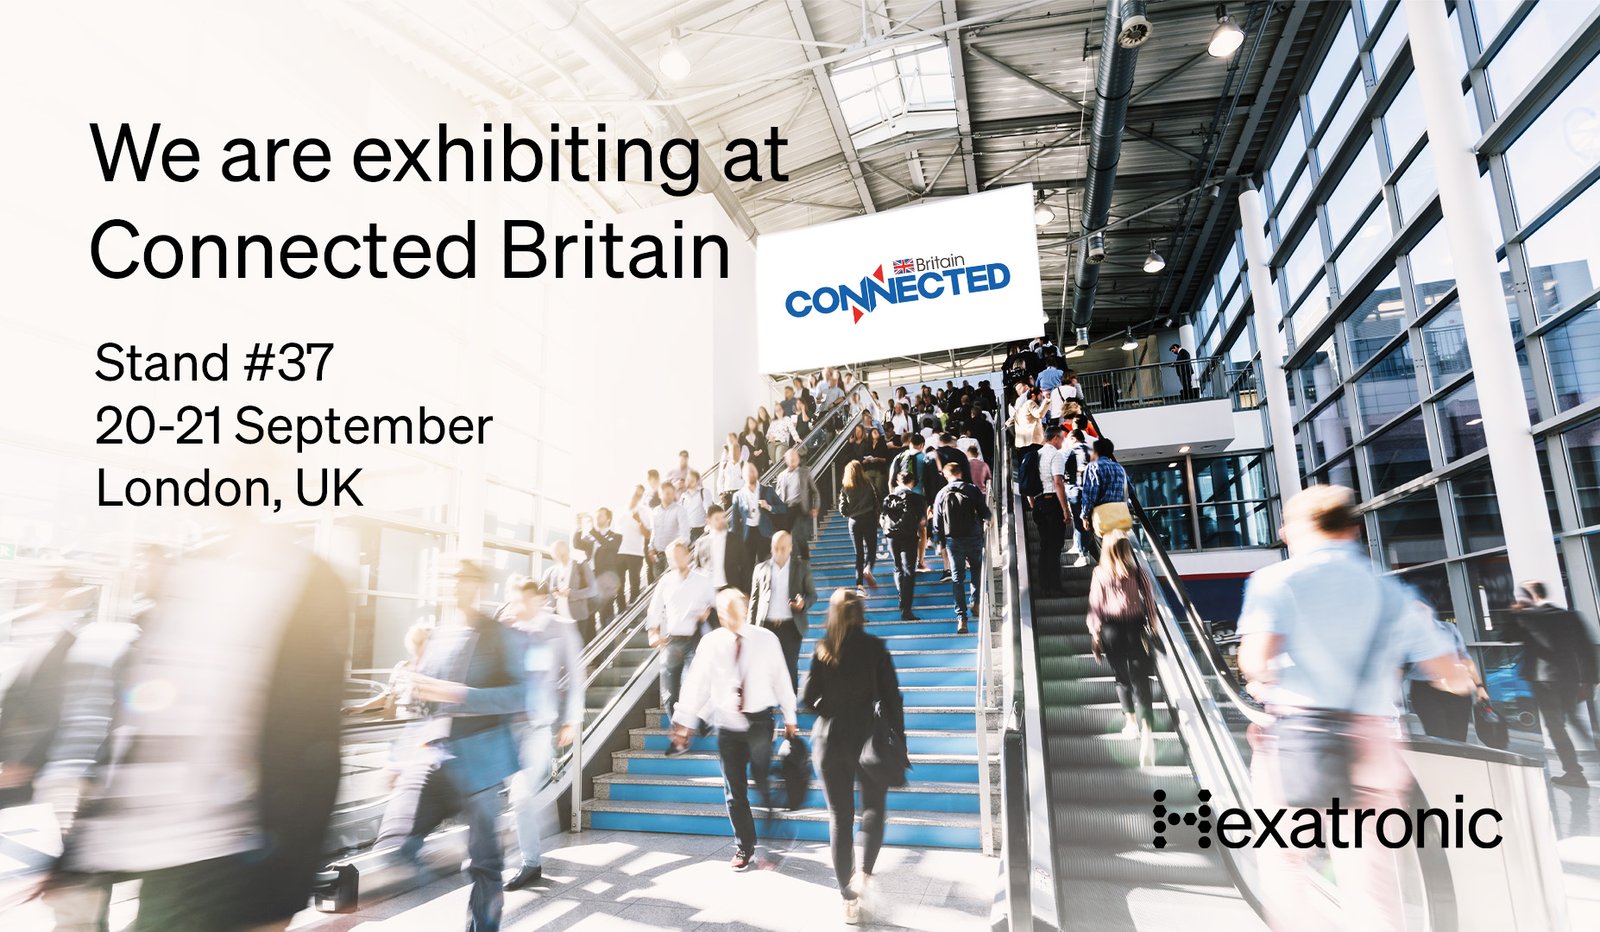 Hexatronic at Connected Britain 2022